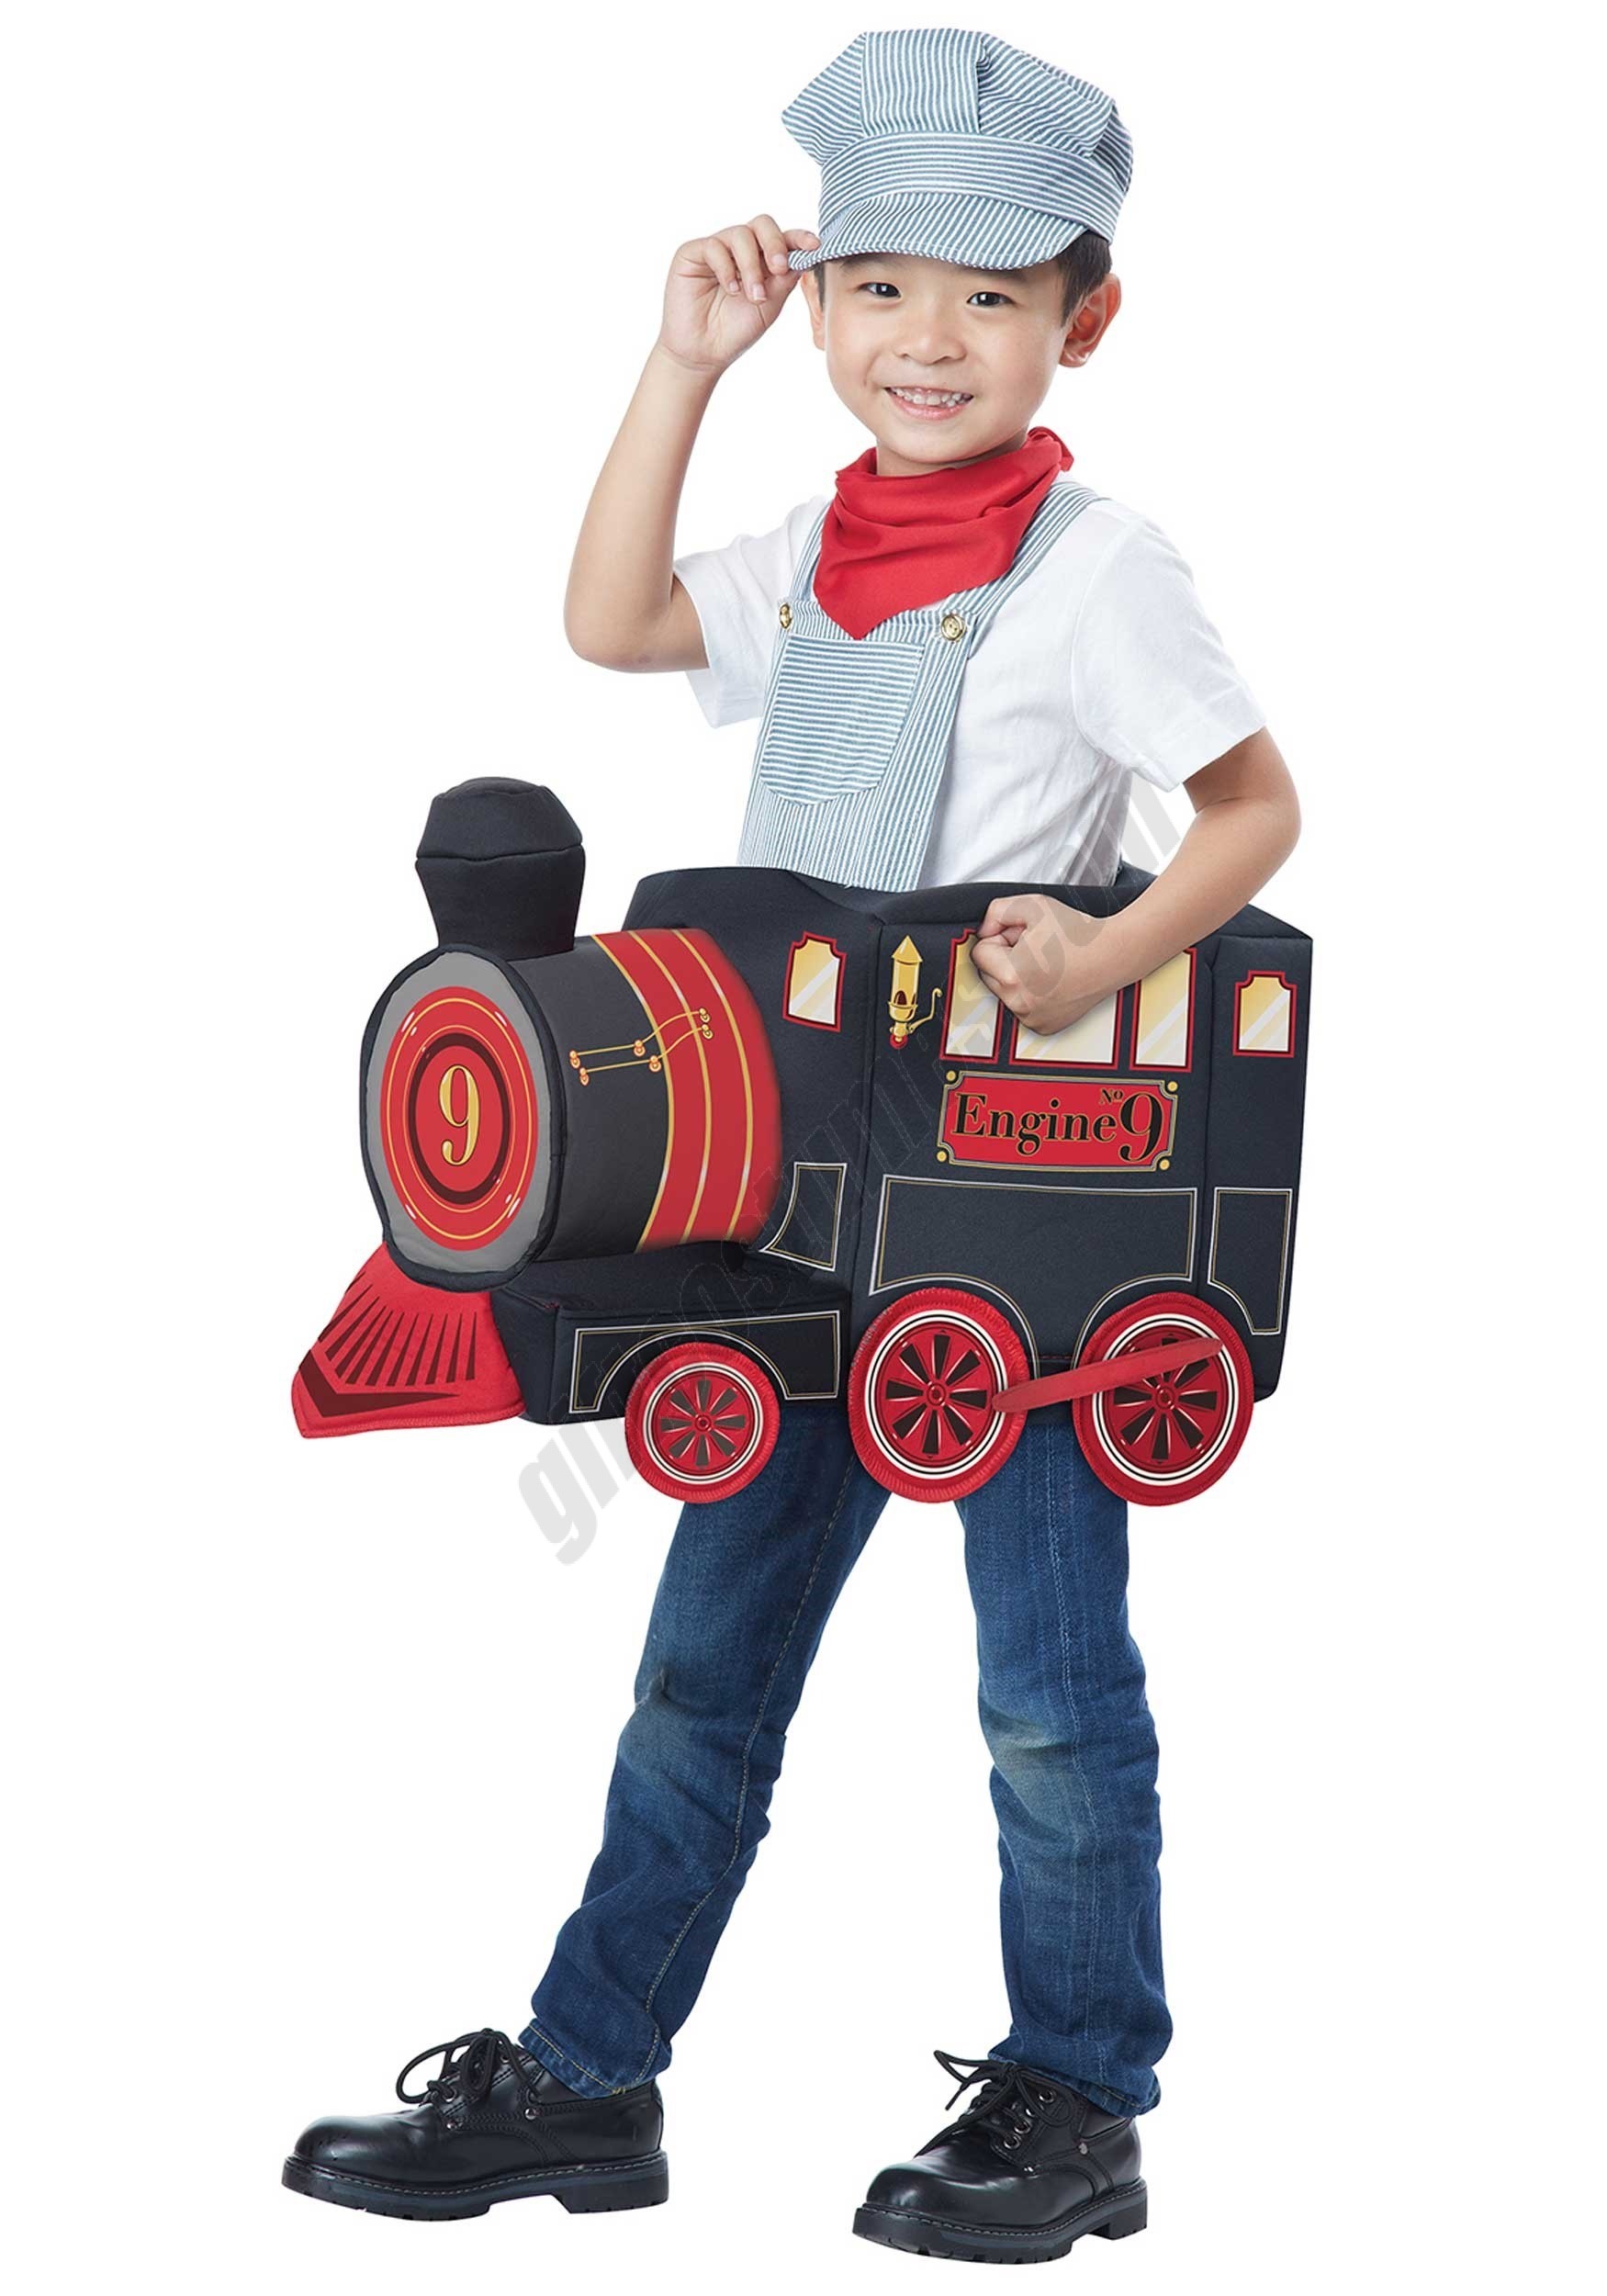 Train Costume For Toddler Promotions - Train Costume For Toddler Promotions